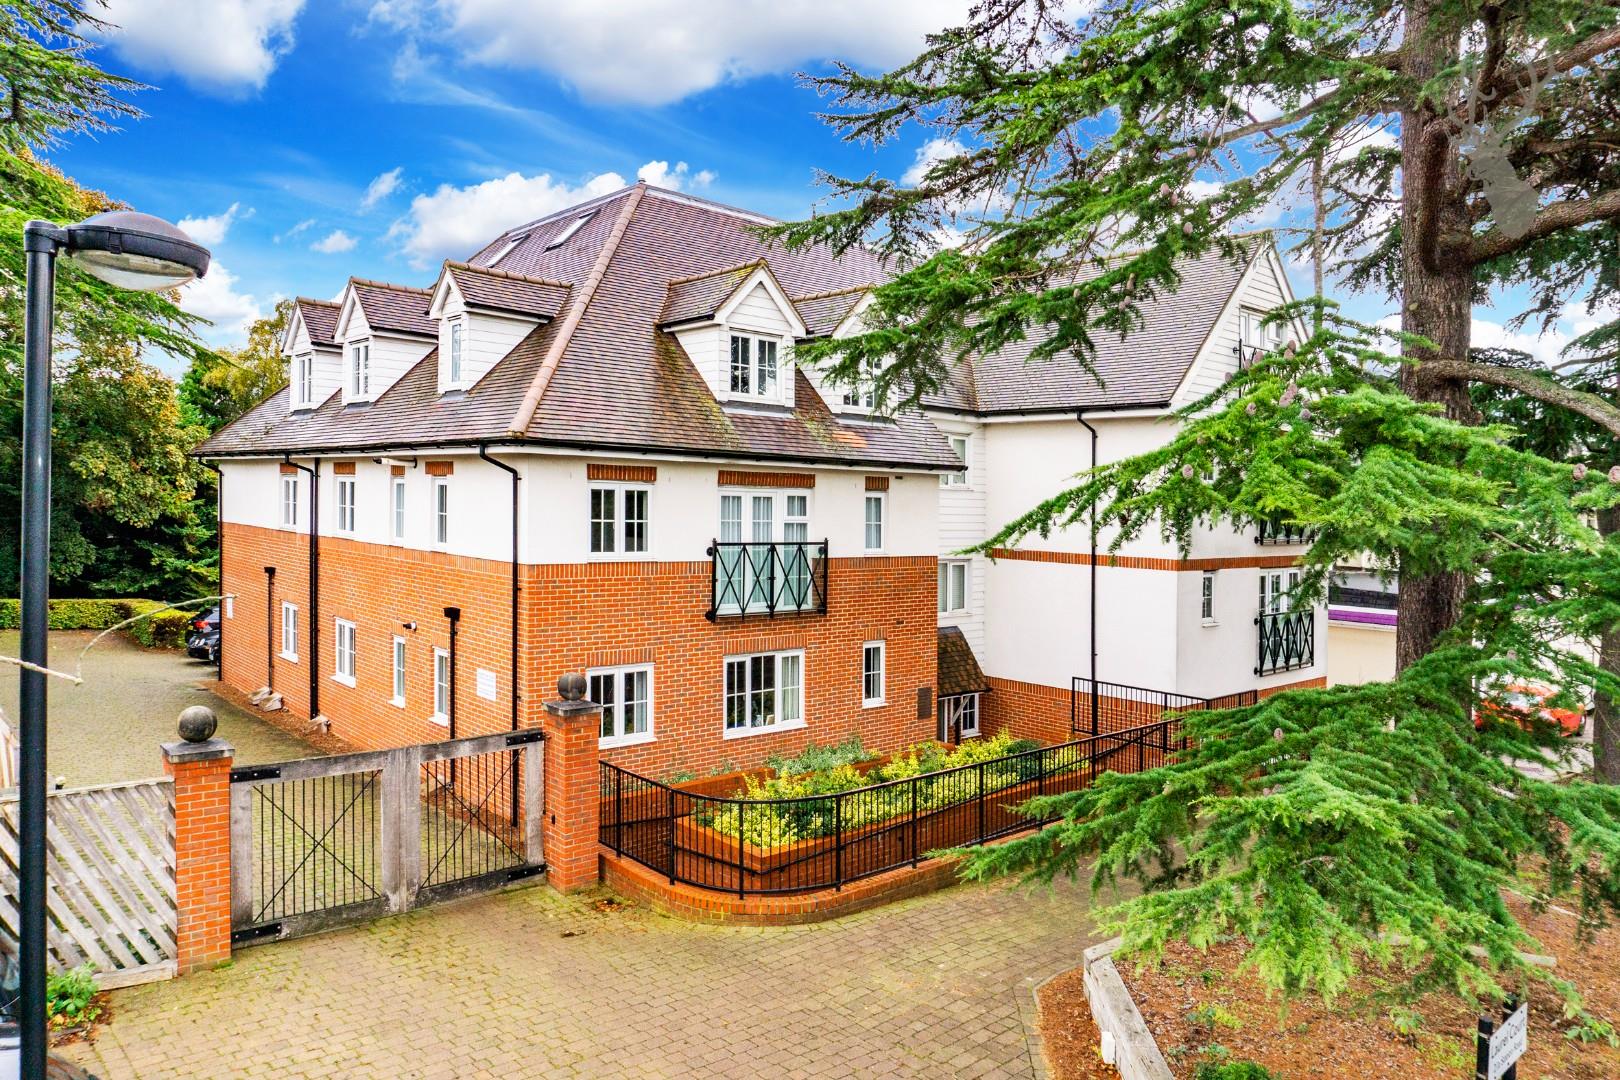 Similar Property: Apartment - Ground Floor in Epping